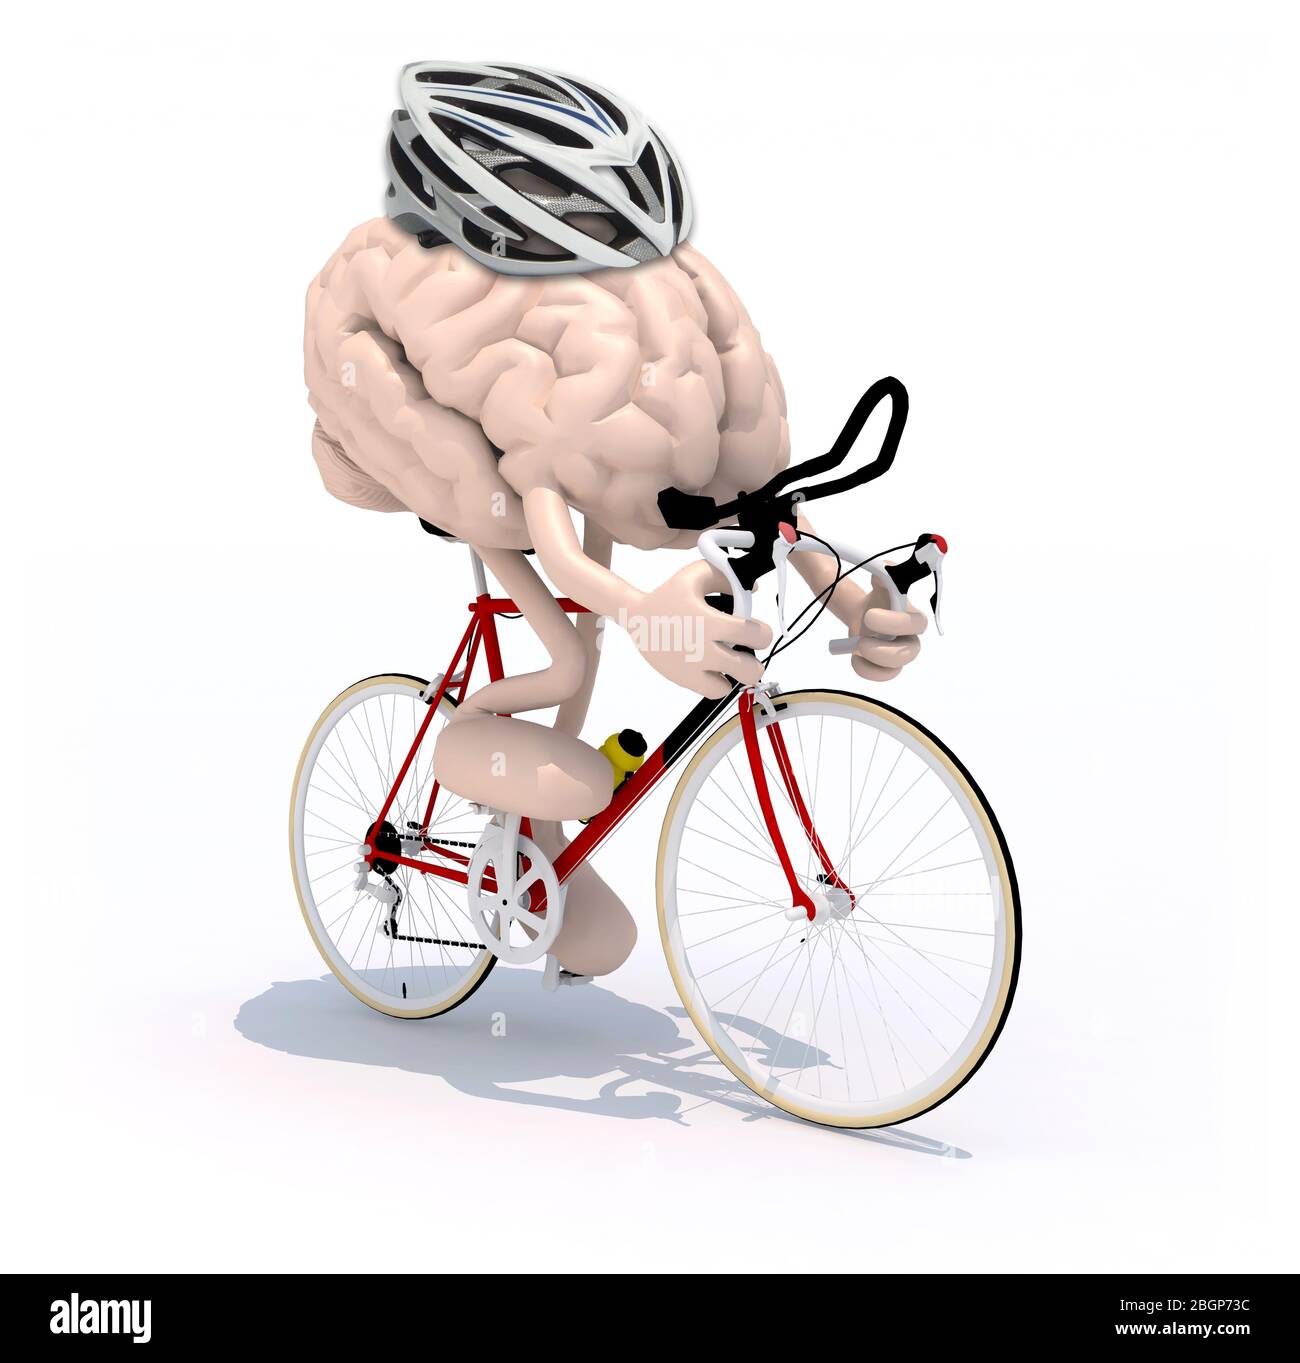 human brain cartoon with arms and legs riding a racing bike, 3d  illustration Stock Photo - Alamy